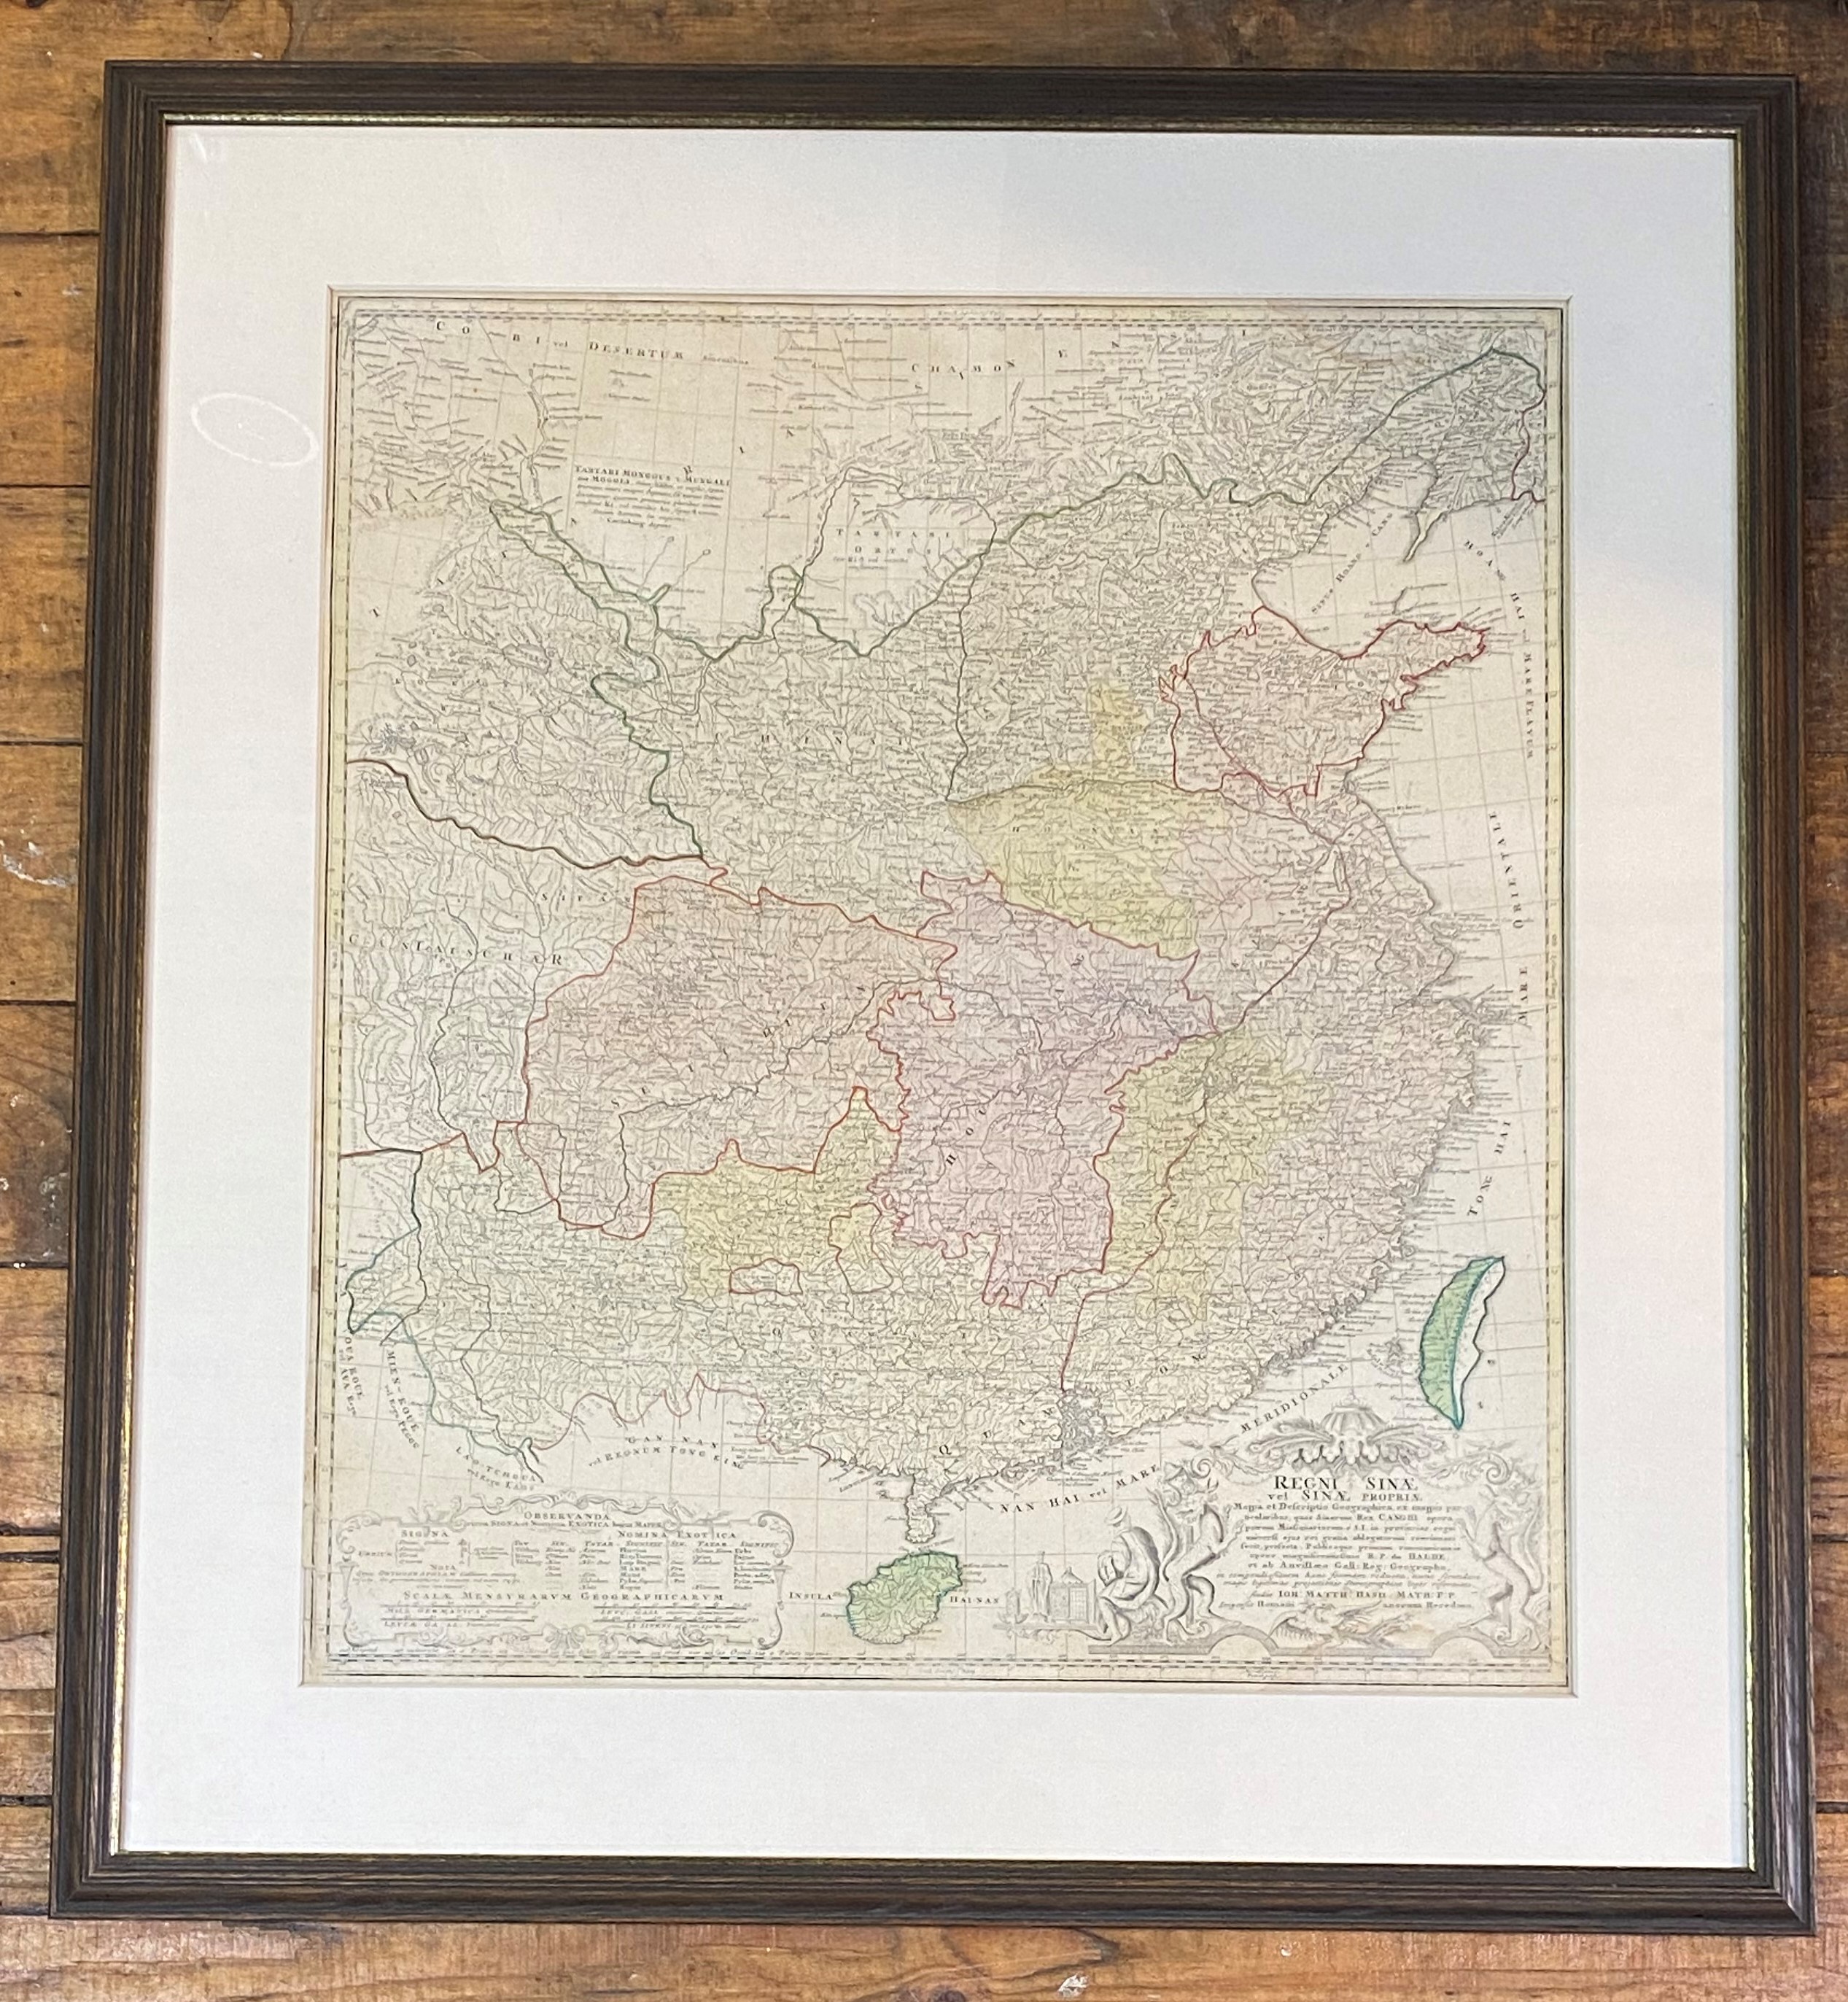 Heirs of Johann Baptist Homann, Regni Sinæ, an engraved map of China, published c. 1750, with - Image 2 of 2